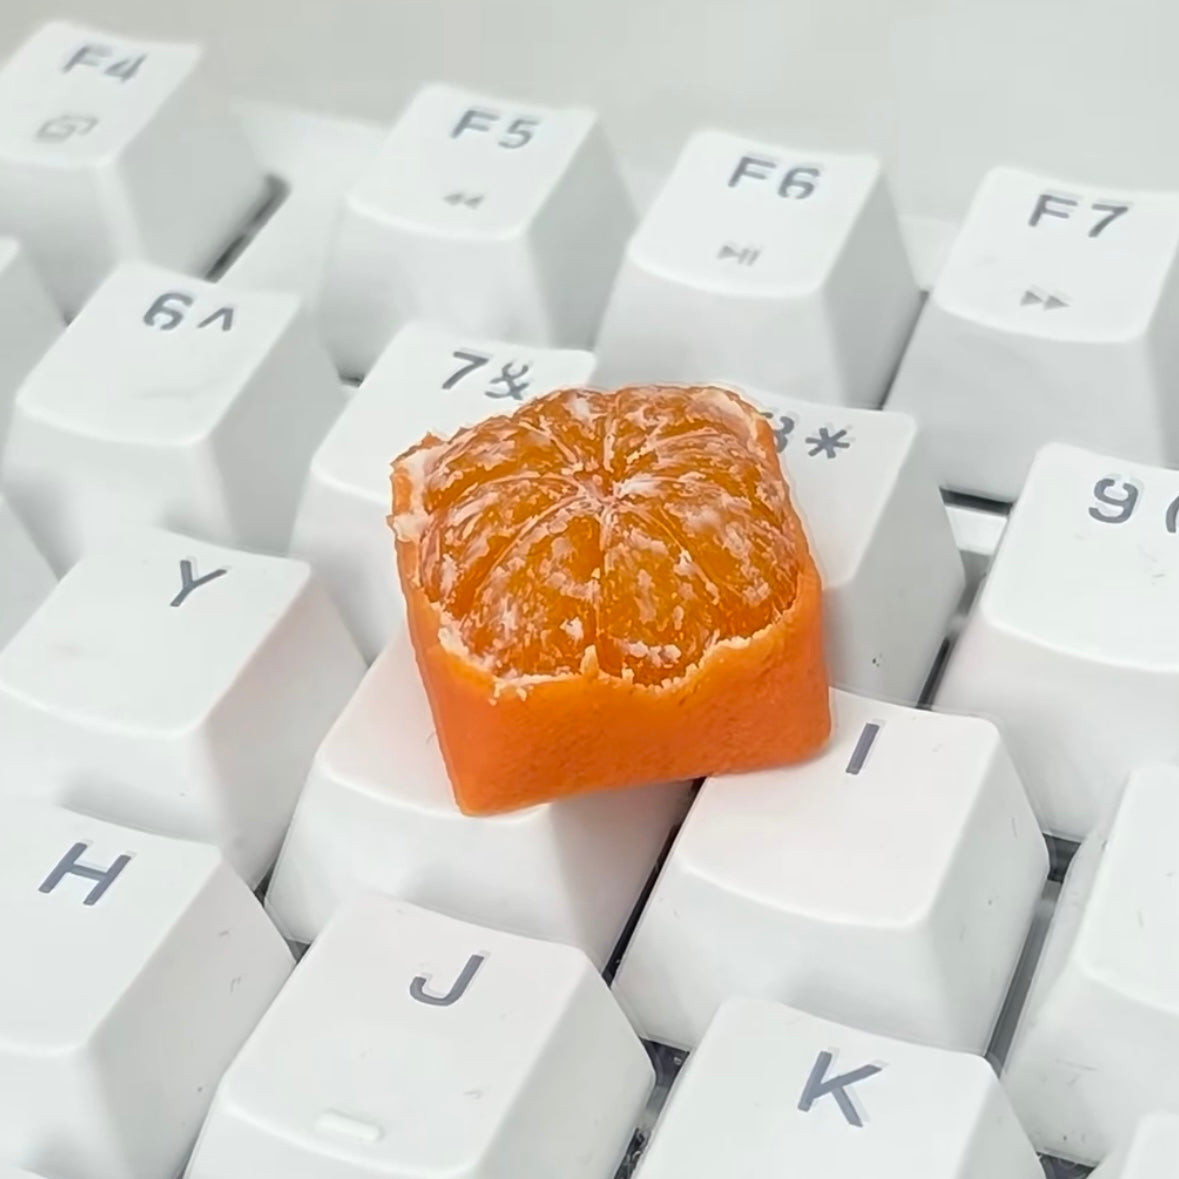 So guess if this is an edible tangerine or a keycap? When you have this keycap, you can brag and pose this question to your friends. They will surely be shocked by the lifelike keycap, which is a square tangerine.  Although it is our handmade keycaps, every Tangerine keycap has a different texture, tangerine peel, etc. This is the charm of customization, your keycap belongs to you only.